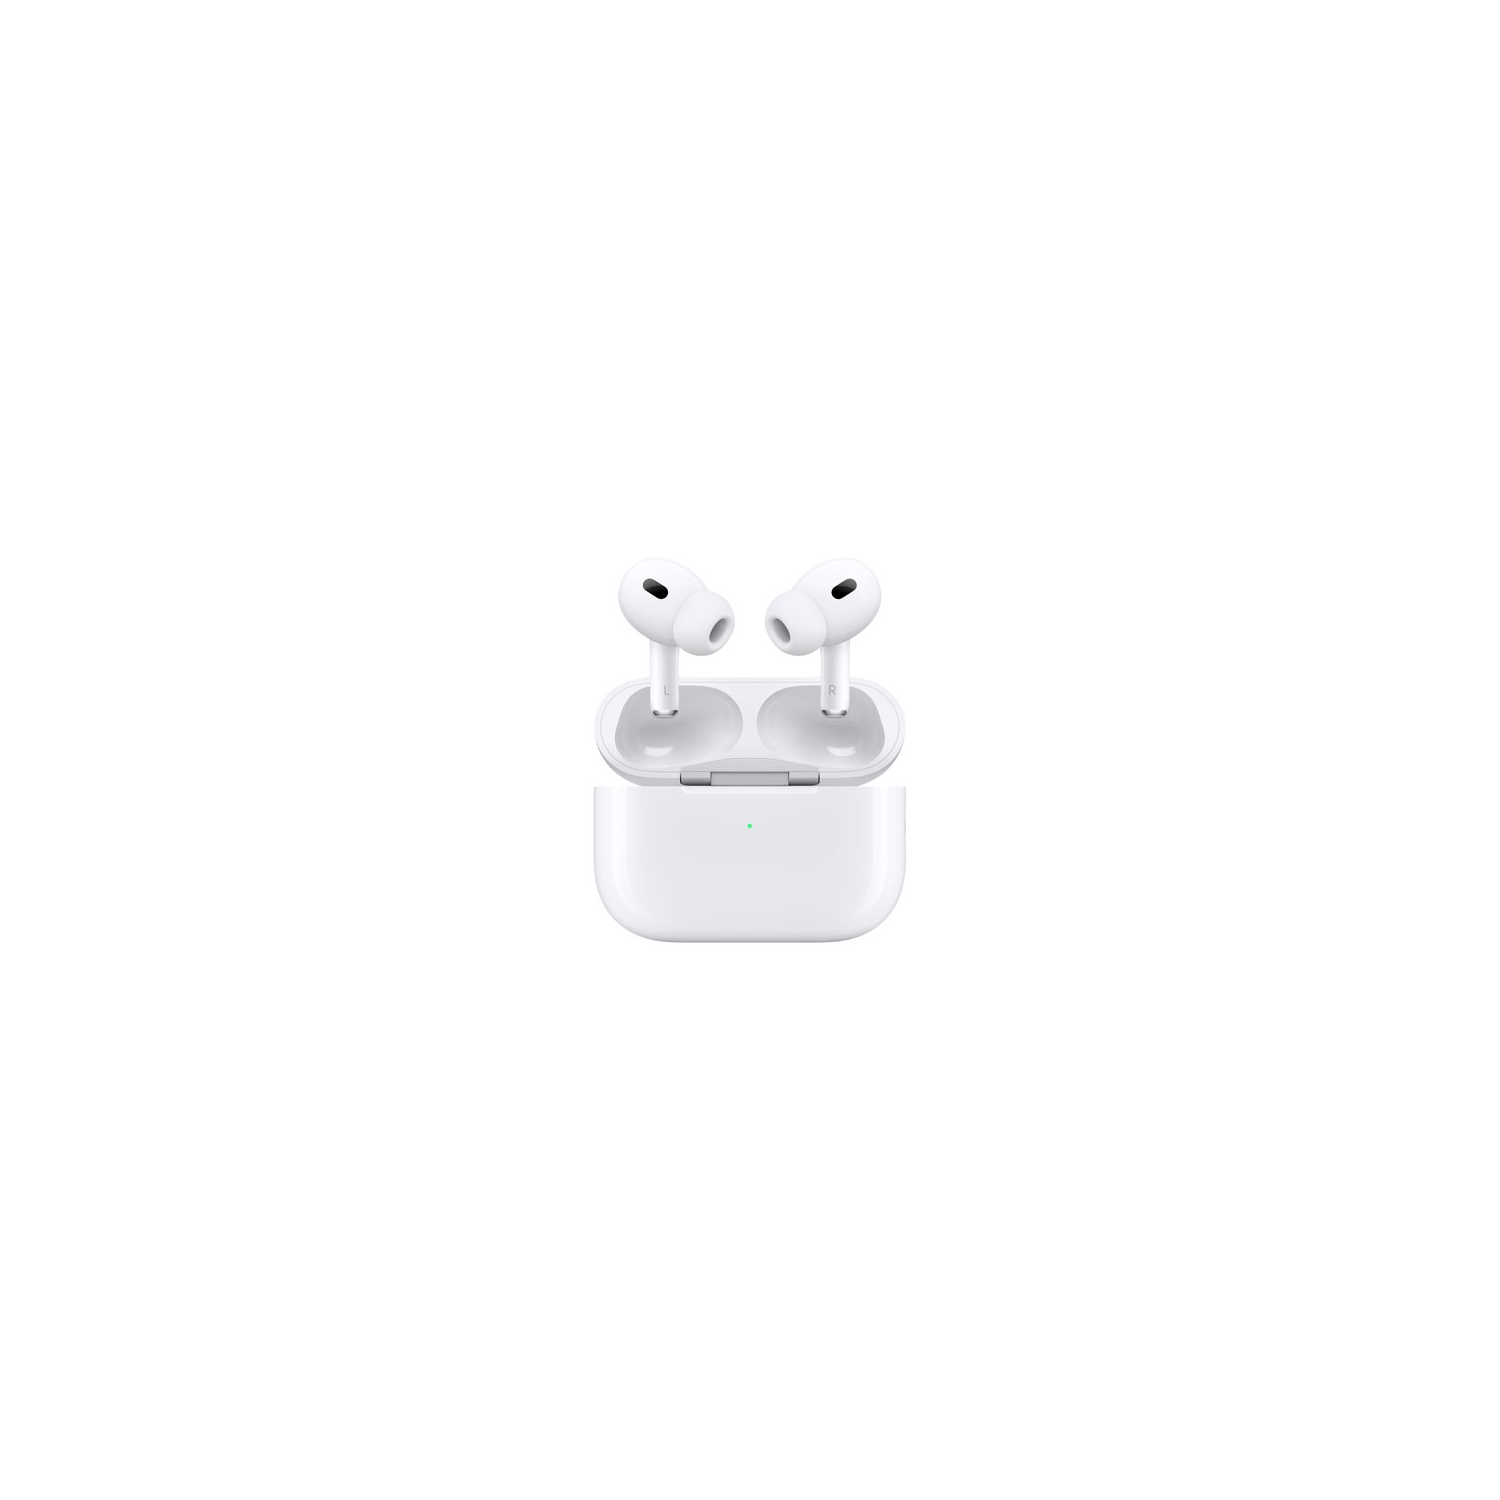 Refurbished (Fair) - Apple AirPods Pro (2nd generation) Noise Cancelling True Wireless Earbuds with USB-C MagSafe Charging Case